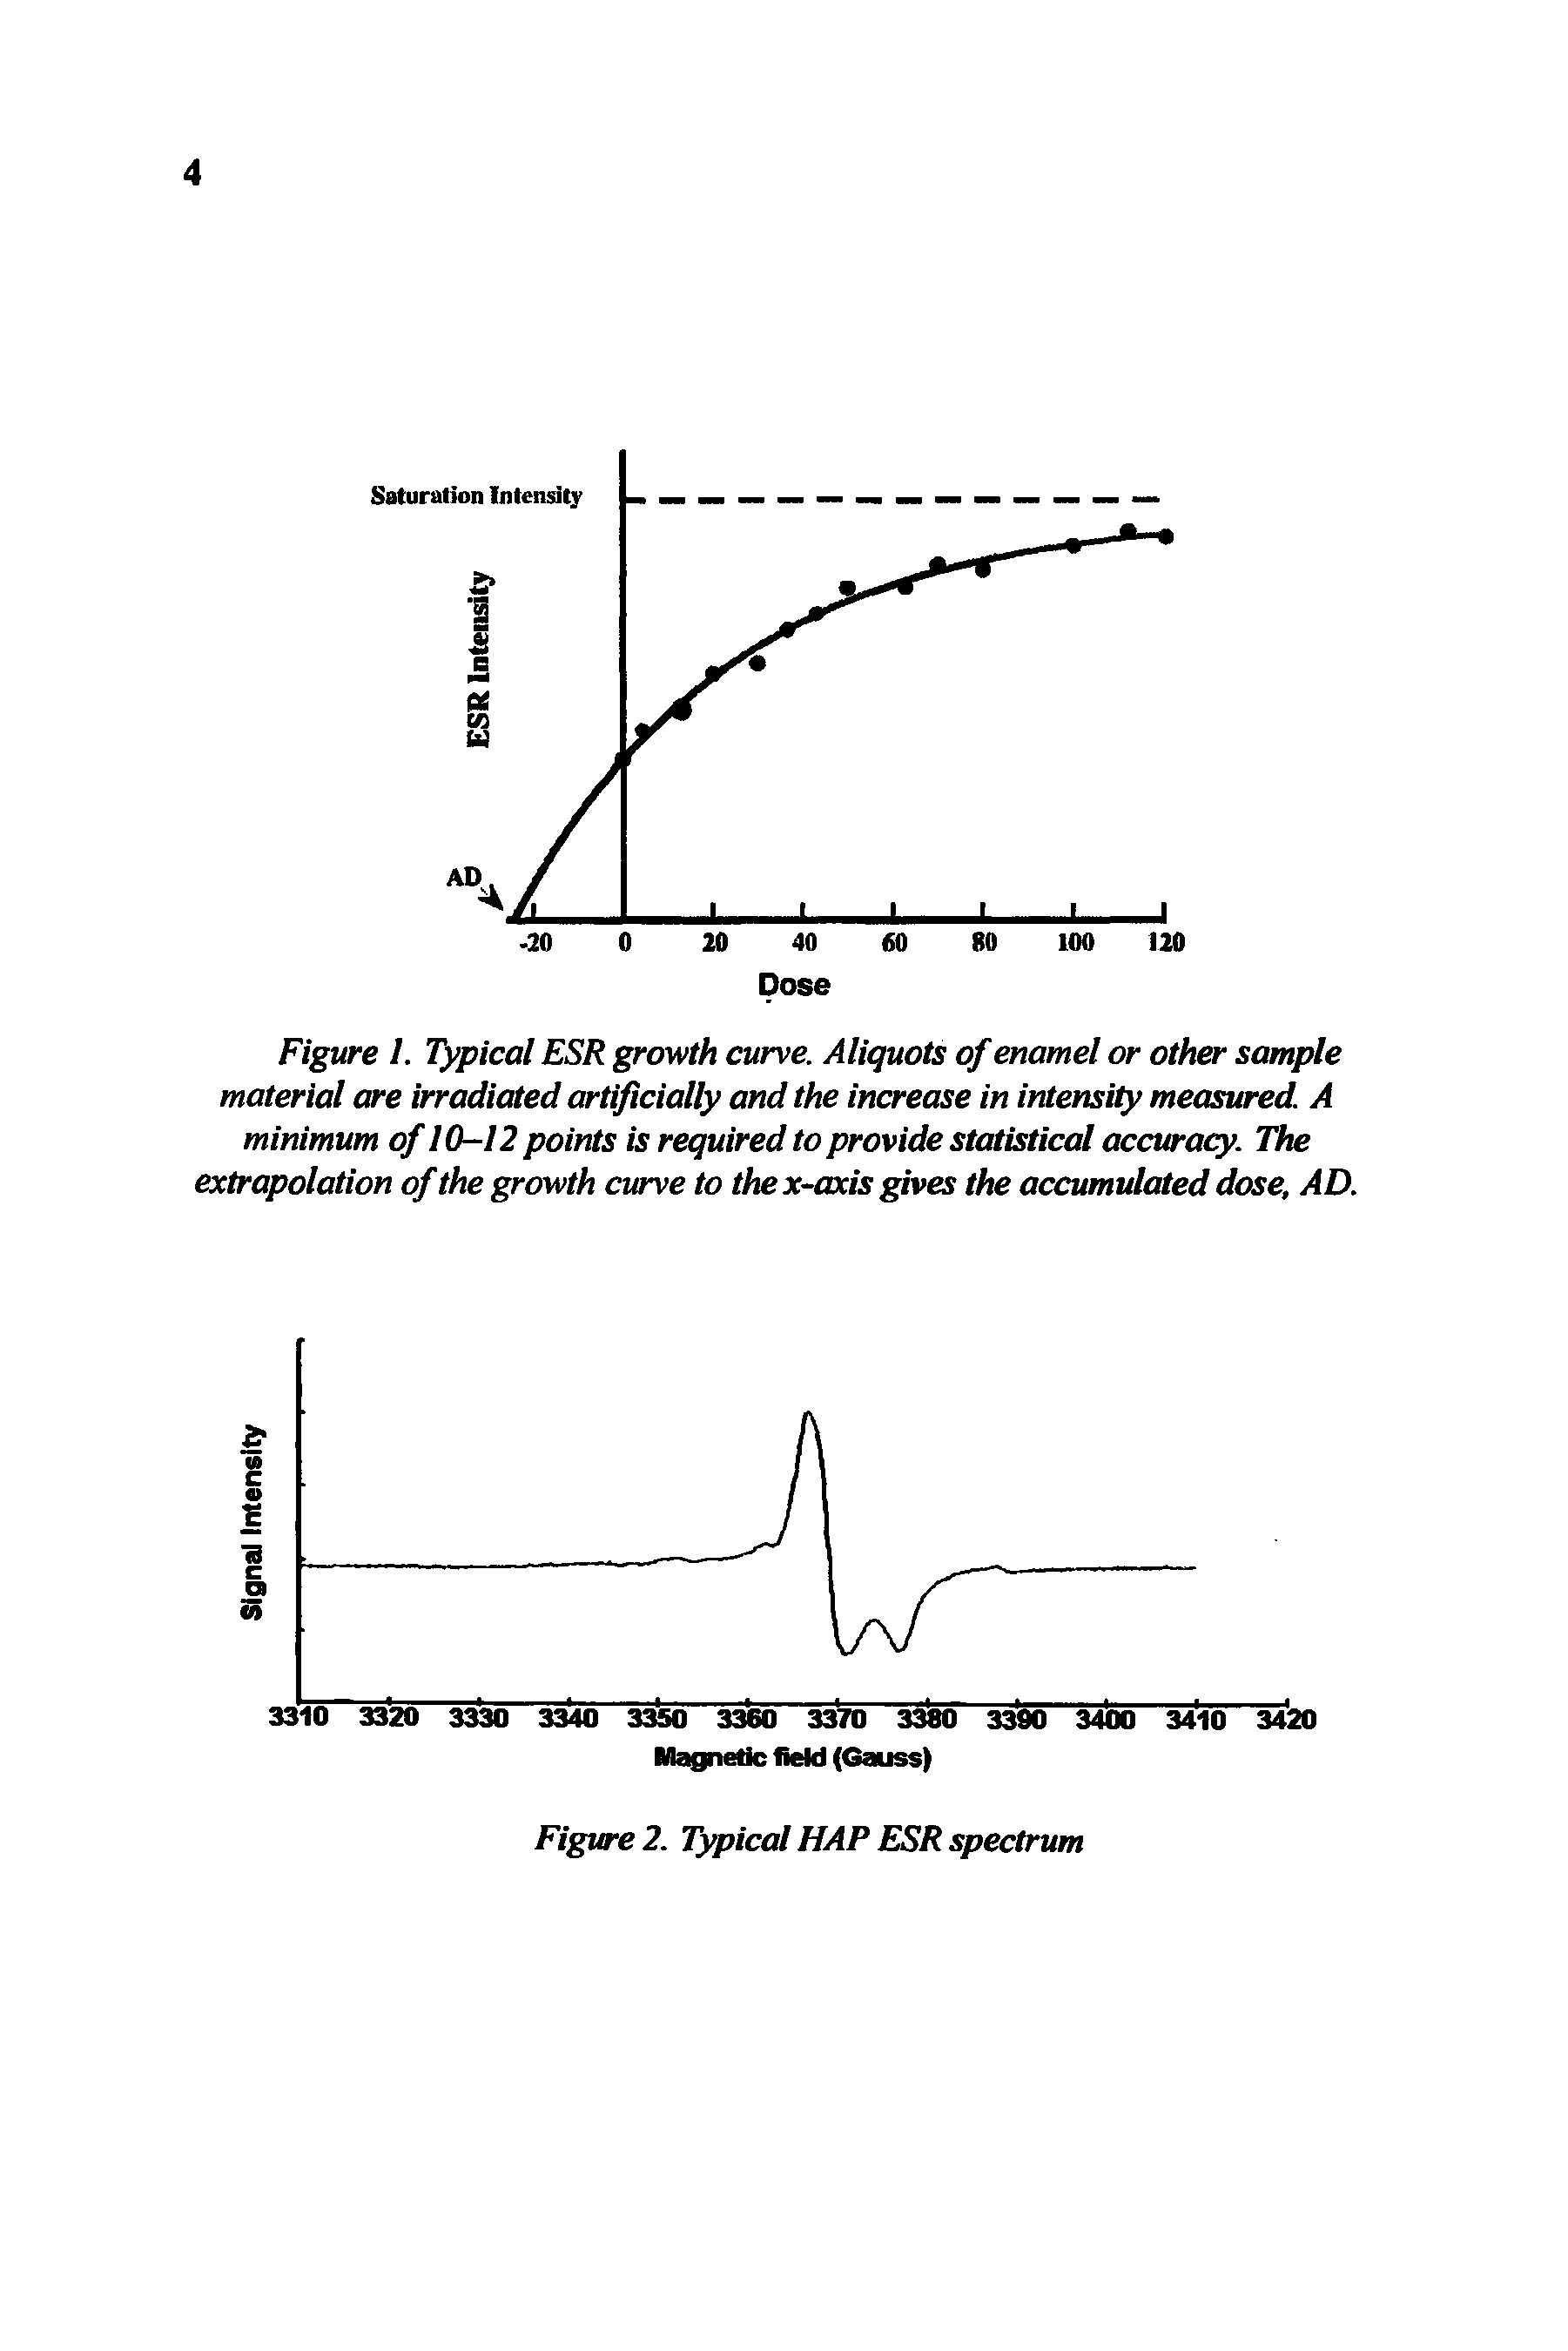 Figure 1. Typical ESR growth curve. Aliquots of enamel or other sample material are irradiated artificially and the increase in intensity measured A minimum of 10-12 points is required to provide statistical accuracy. The extrapolation of the growth curve to the x-axis gives the accumulated dose, AD.